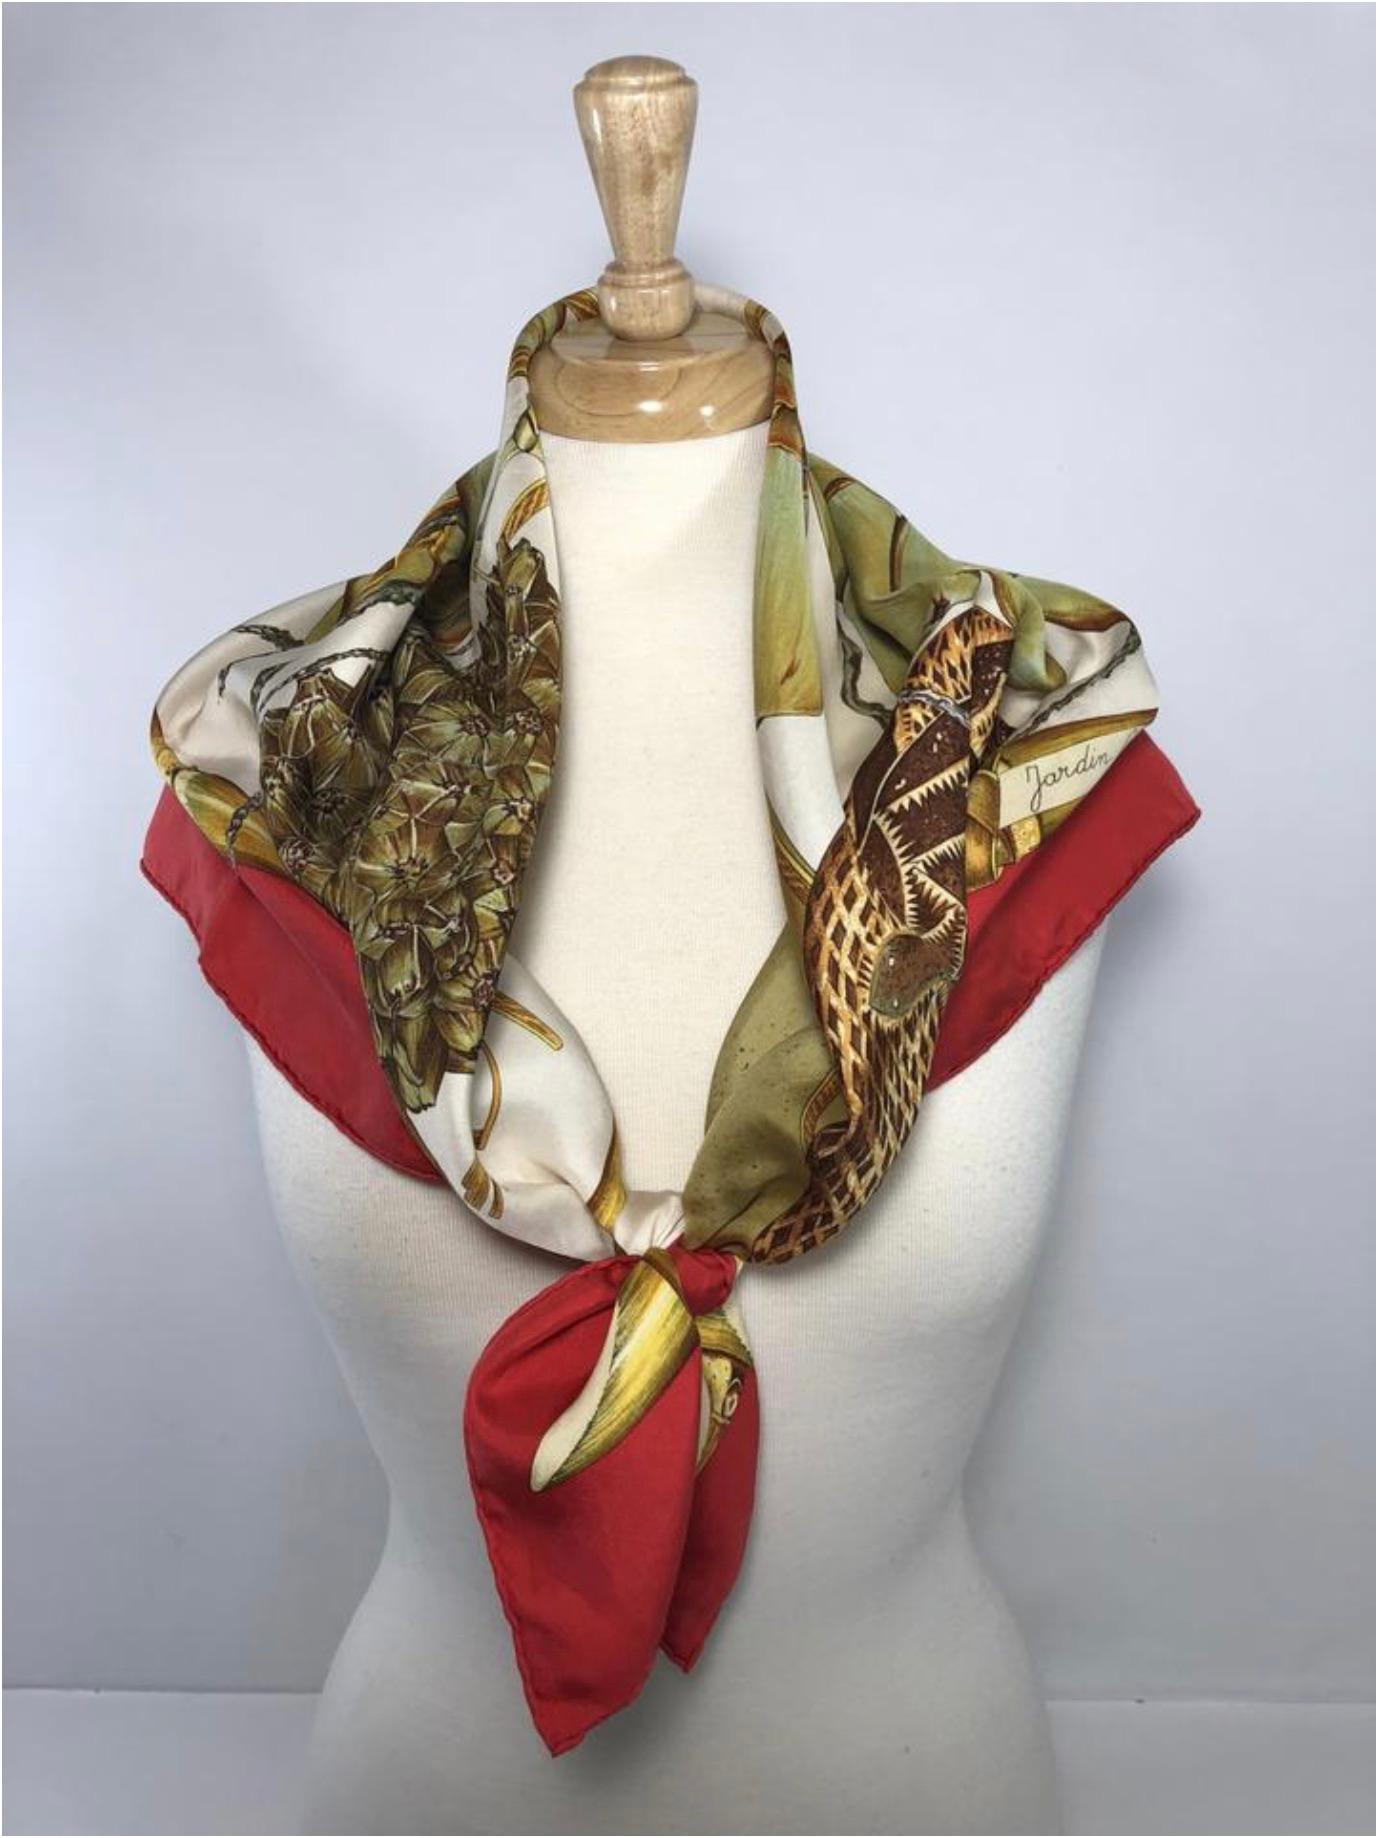 MODEL - Hermes Scarf Jardin Creole Silk 

CONDITION - Exceptional! No visible signs of wear. Silk has soften.

SKU - 2774

DATE/SERIAL CODE - NA

ORIGIN - France

PRODUCTION - NA

DIMENSIONS - L35 x H35 x D.05

STRAP/HANDLE DROP - NA

MATERIAL -